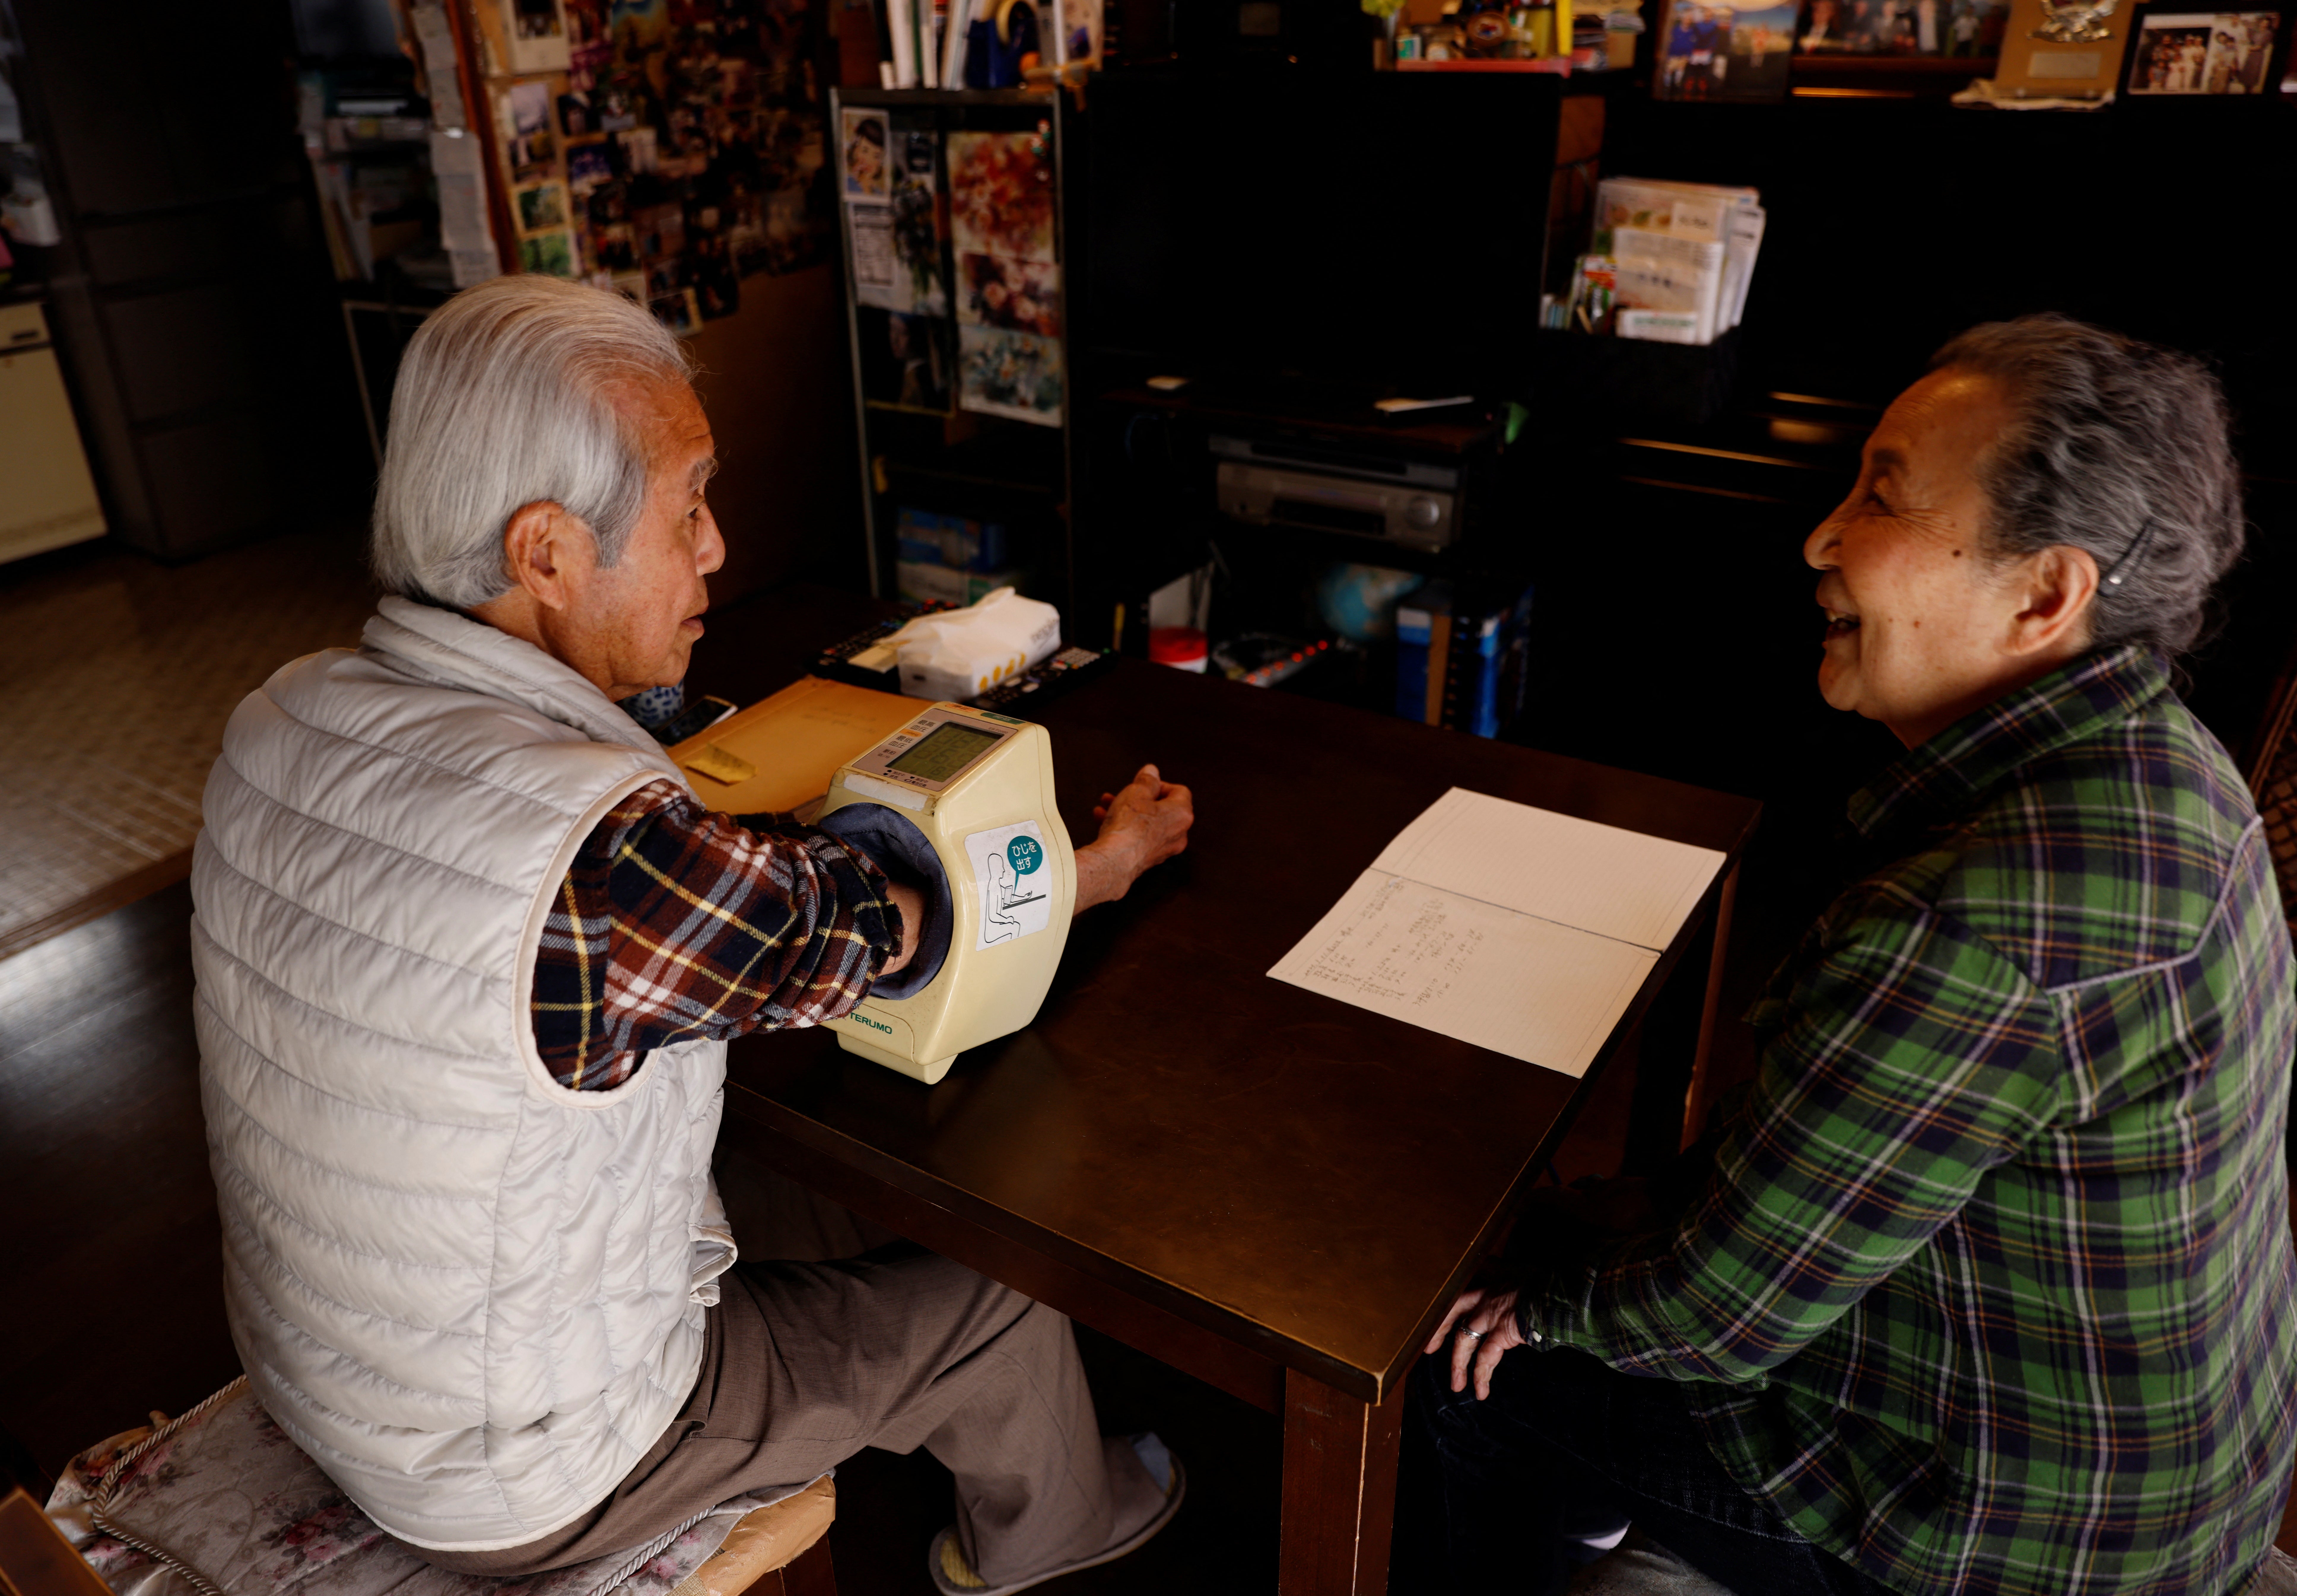 Nomura checks his blood pressure while his wife Junko Nomura, 80, writes down the reading on a notebook to keep record